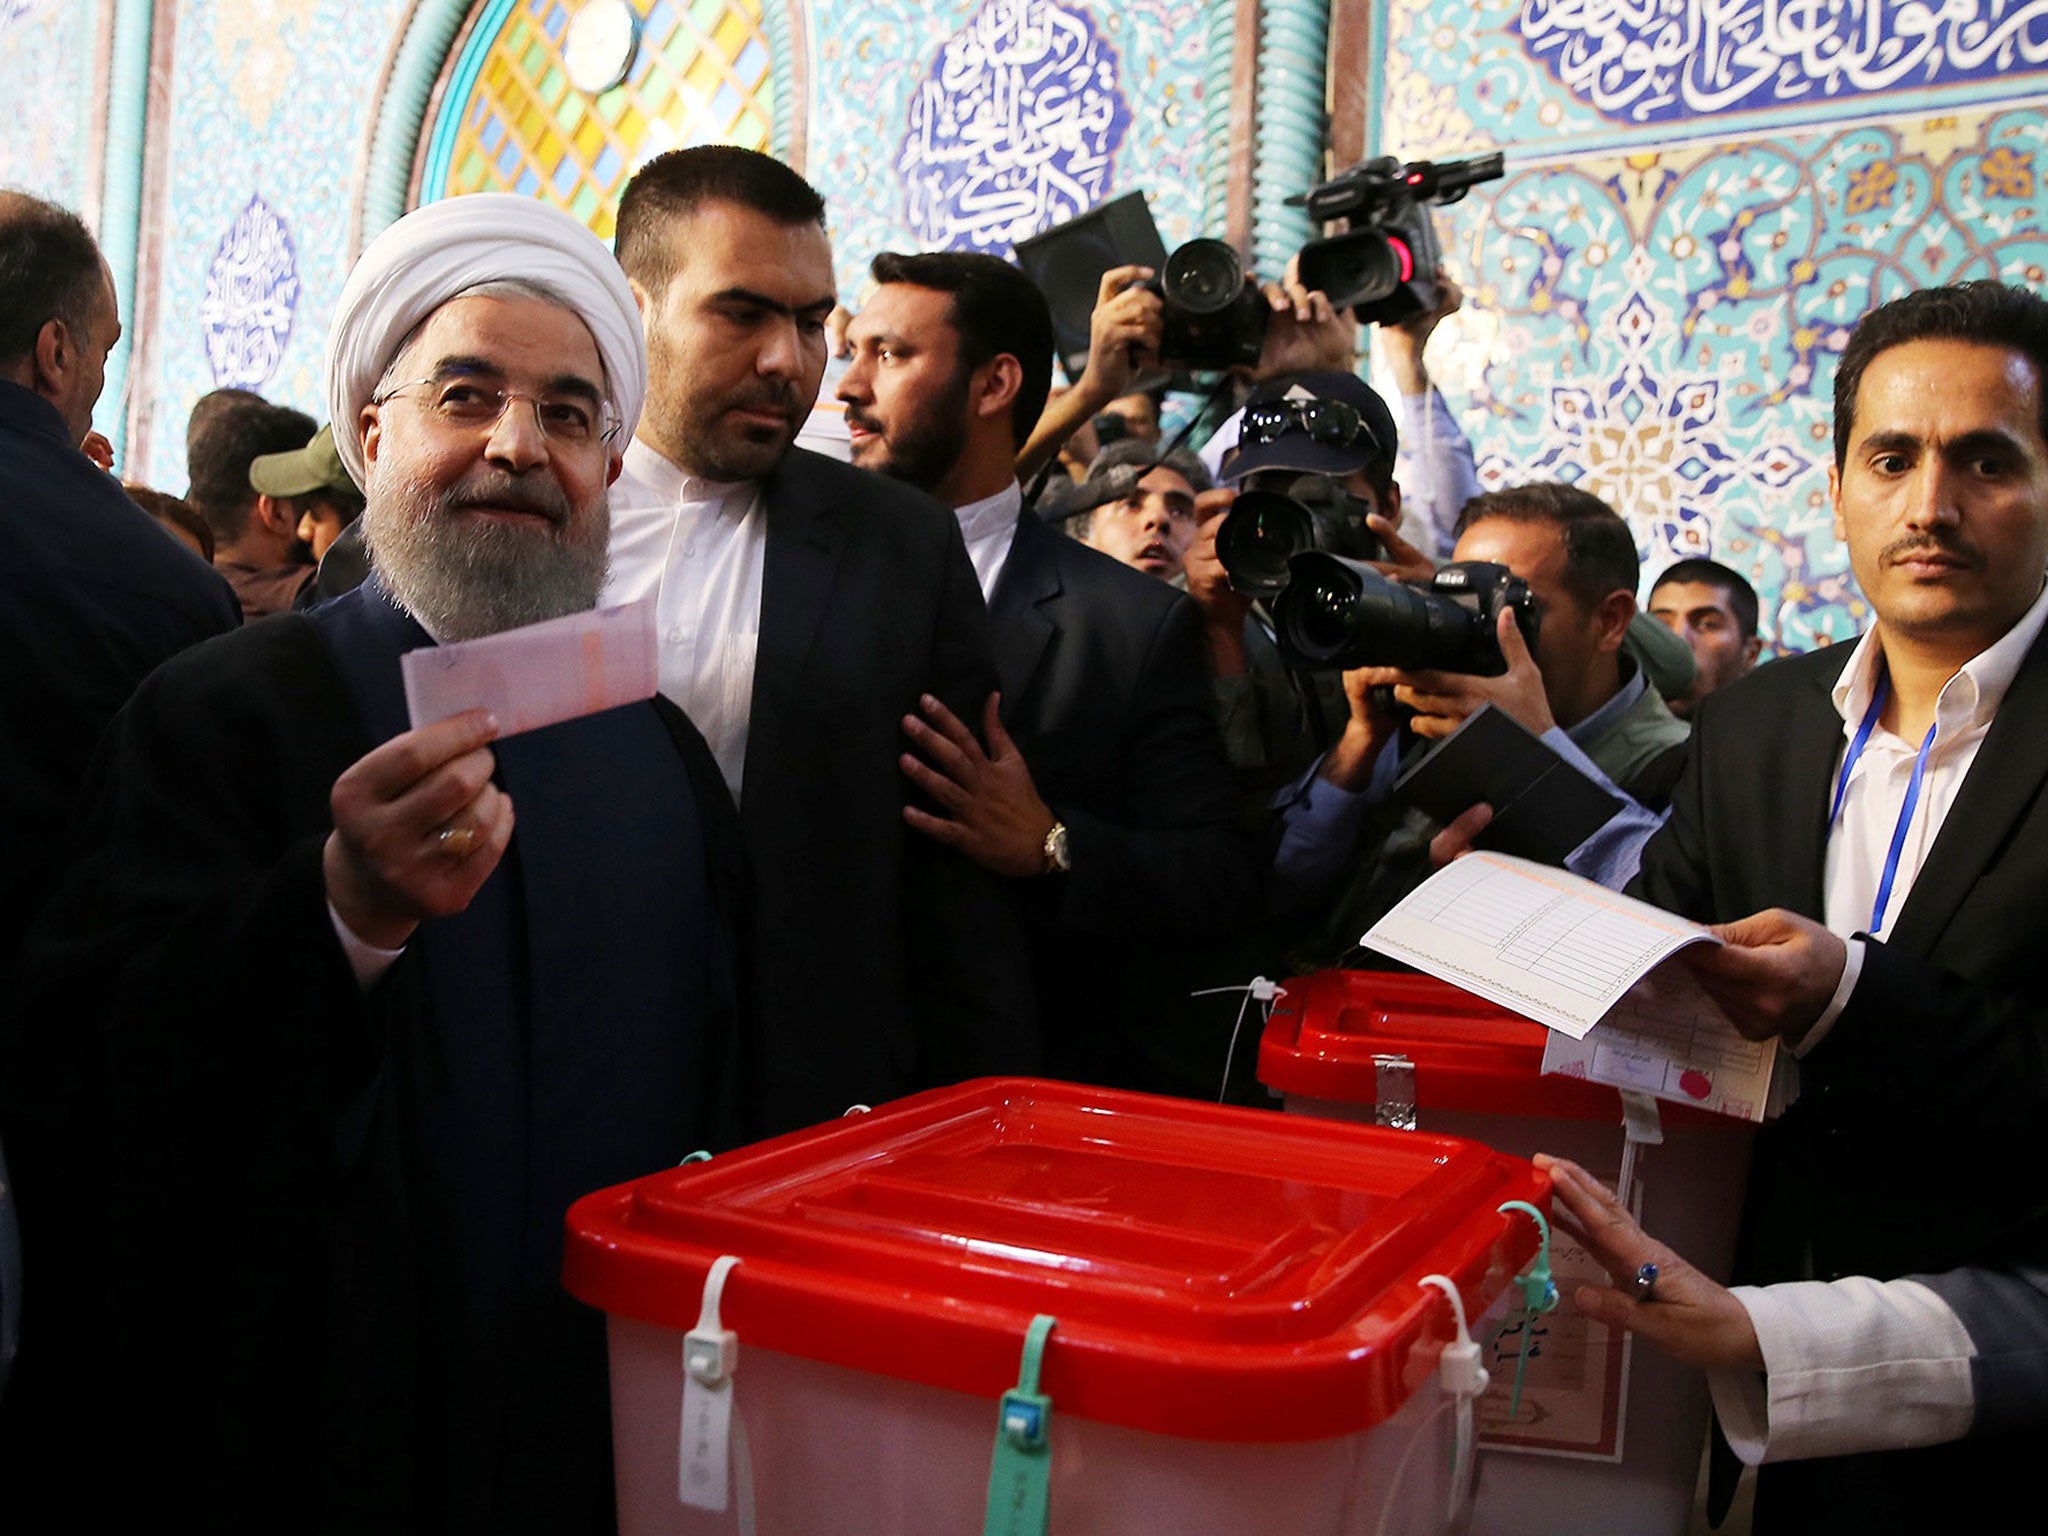 President Hassan Rouhani was re-elected with 57 per cent of the vote, or close to 23 million votes